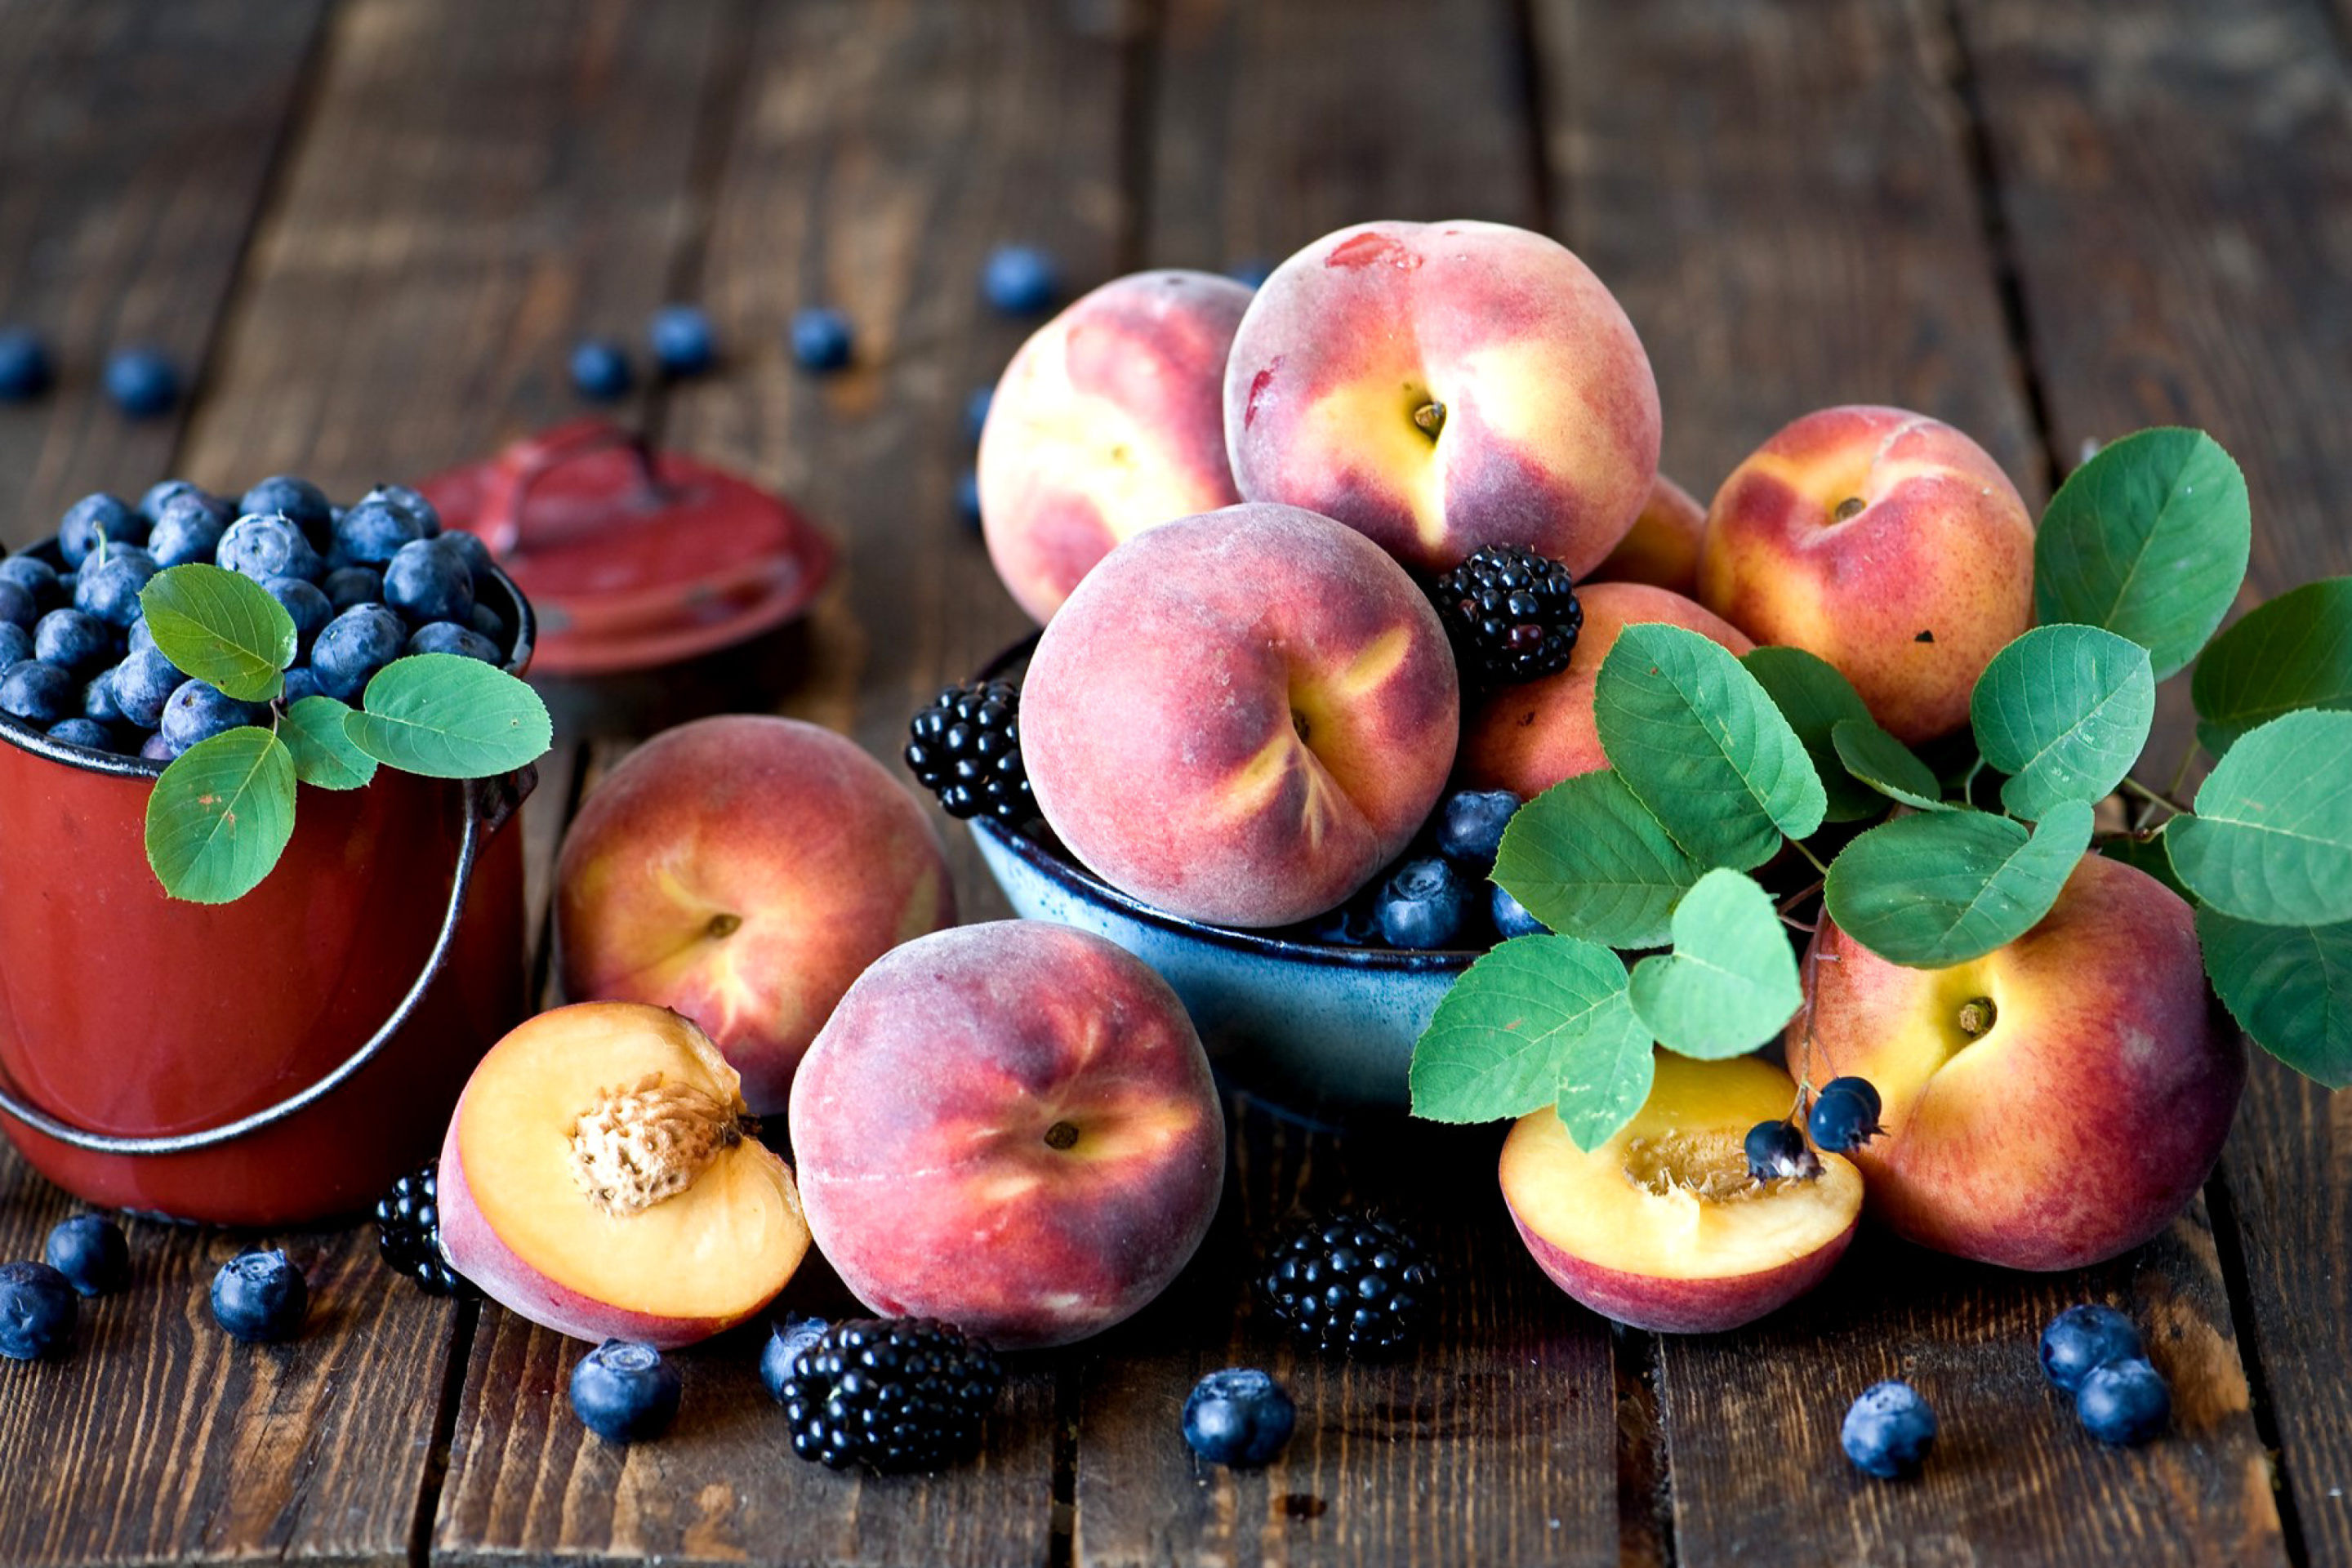 Blueberries and Peaches wallpaper 2880x1920